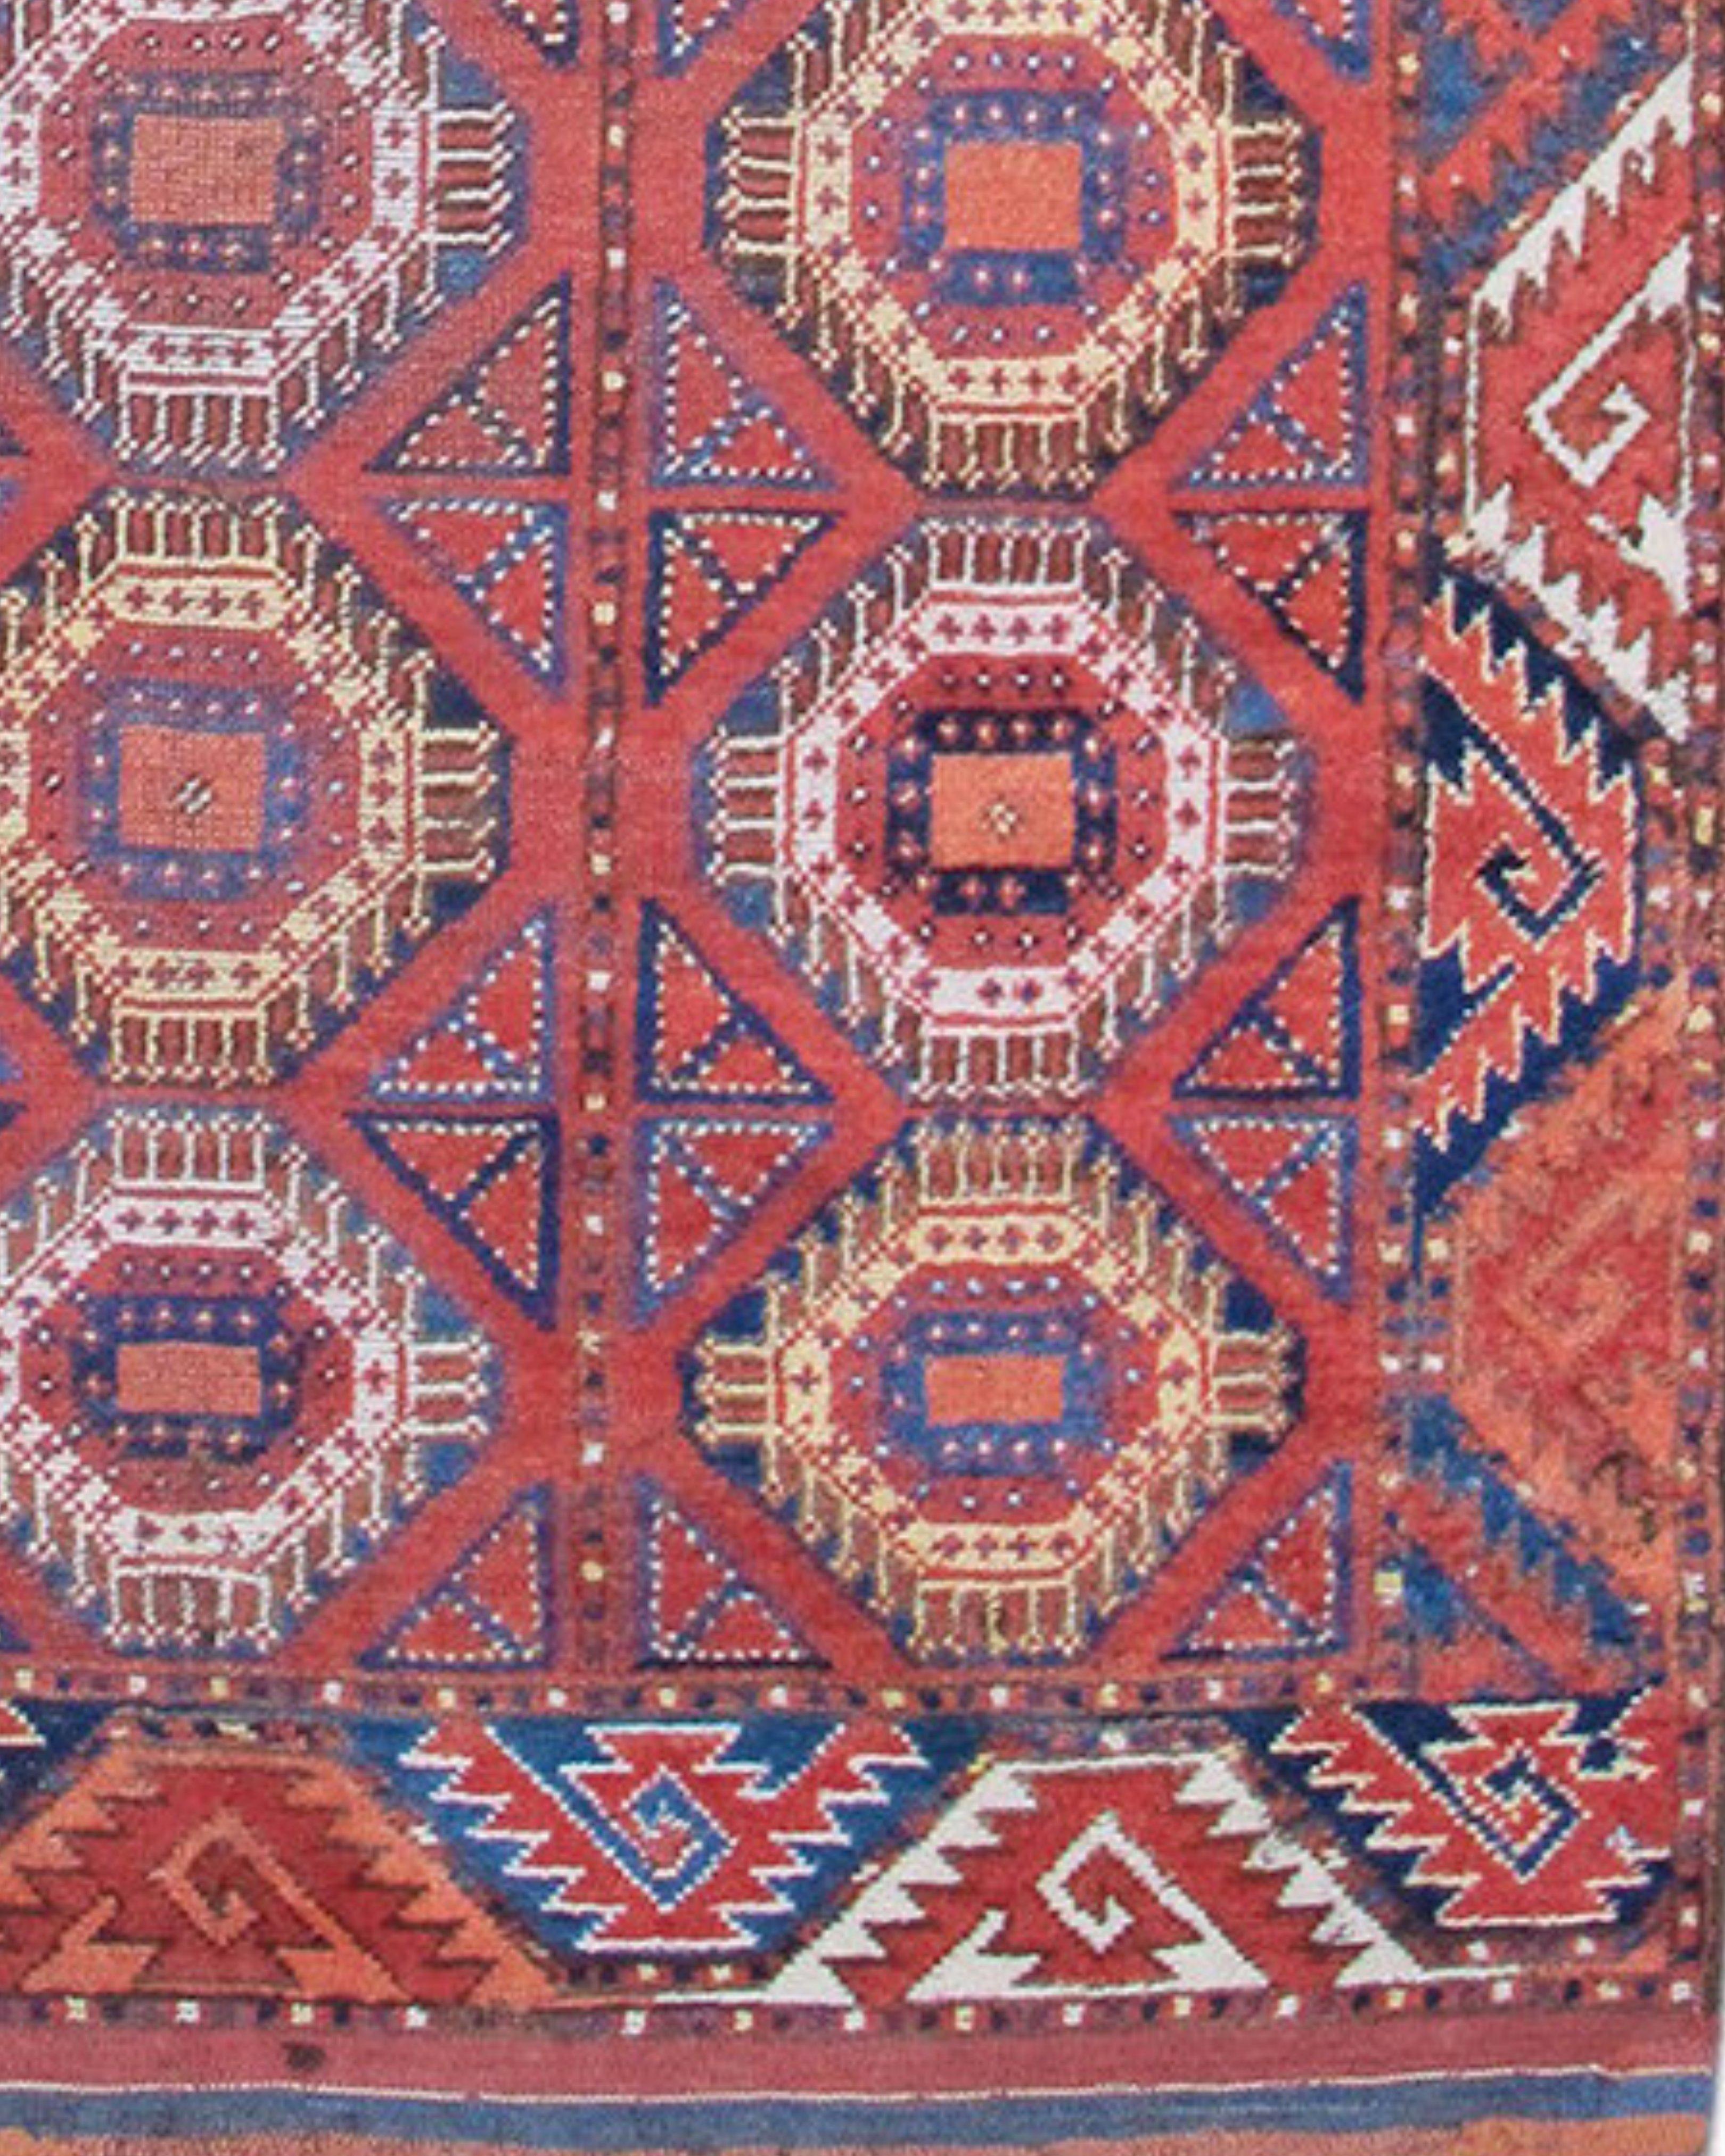 Red Bashir Ersari Long Rug with Tiled Octagons, 19th Century In Excellent Condition For Sale In San Francisco, CA